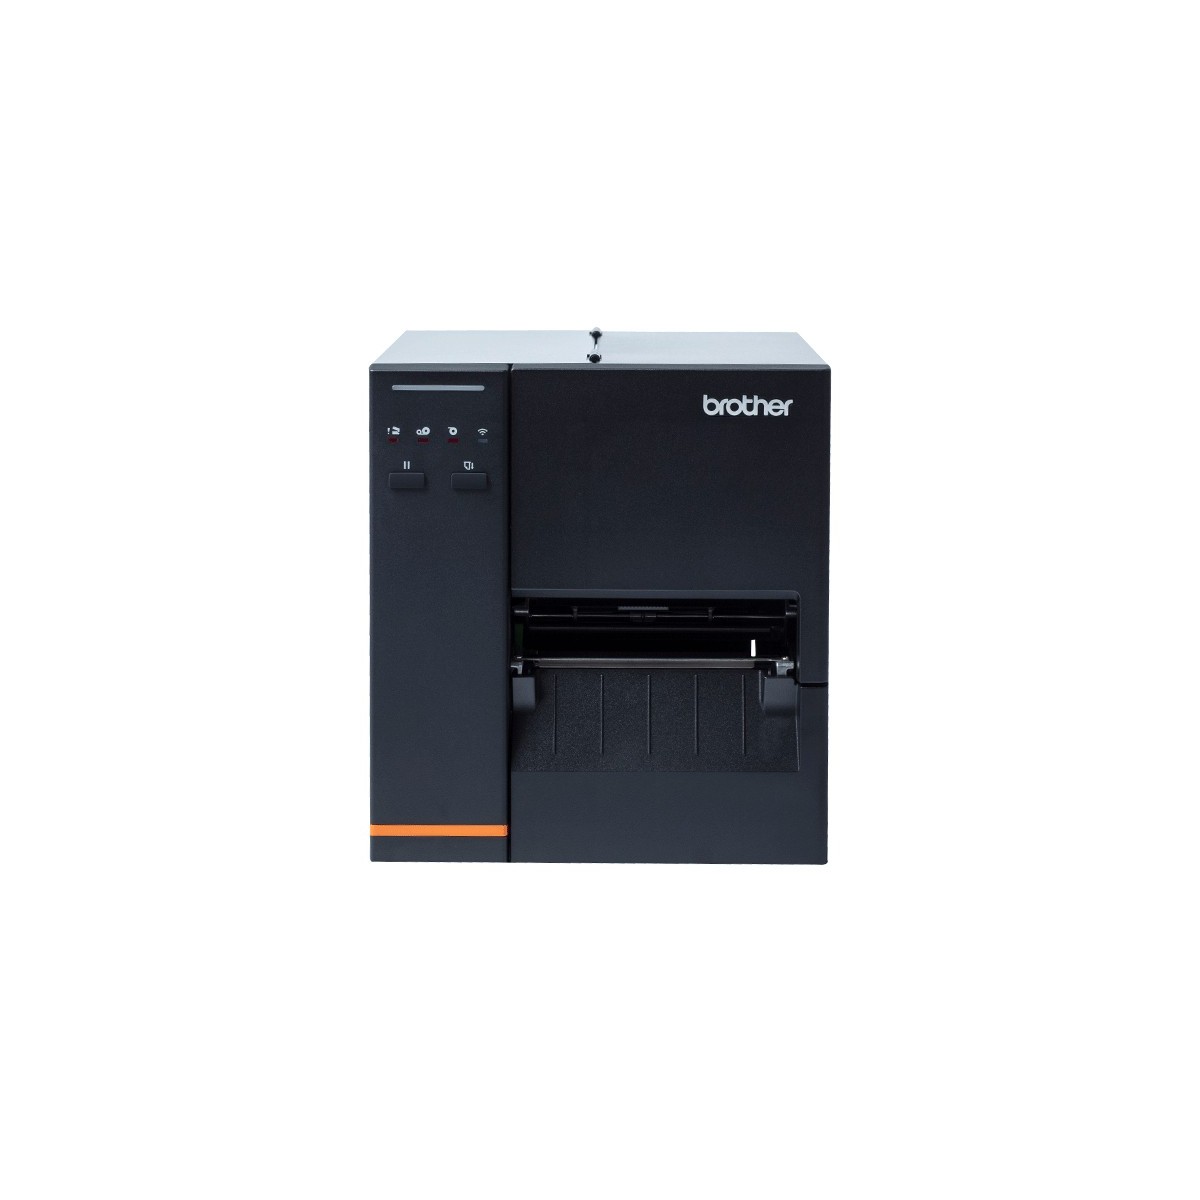 Brother TJ-4020TN - Direct thermal / Thermal transfer - 203 x 203 DPI - 254 mm/sec - Wired - Black